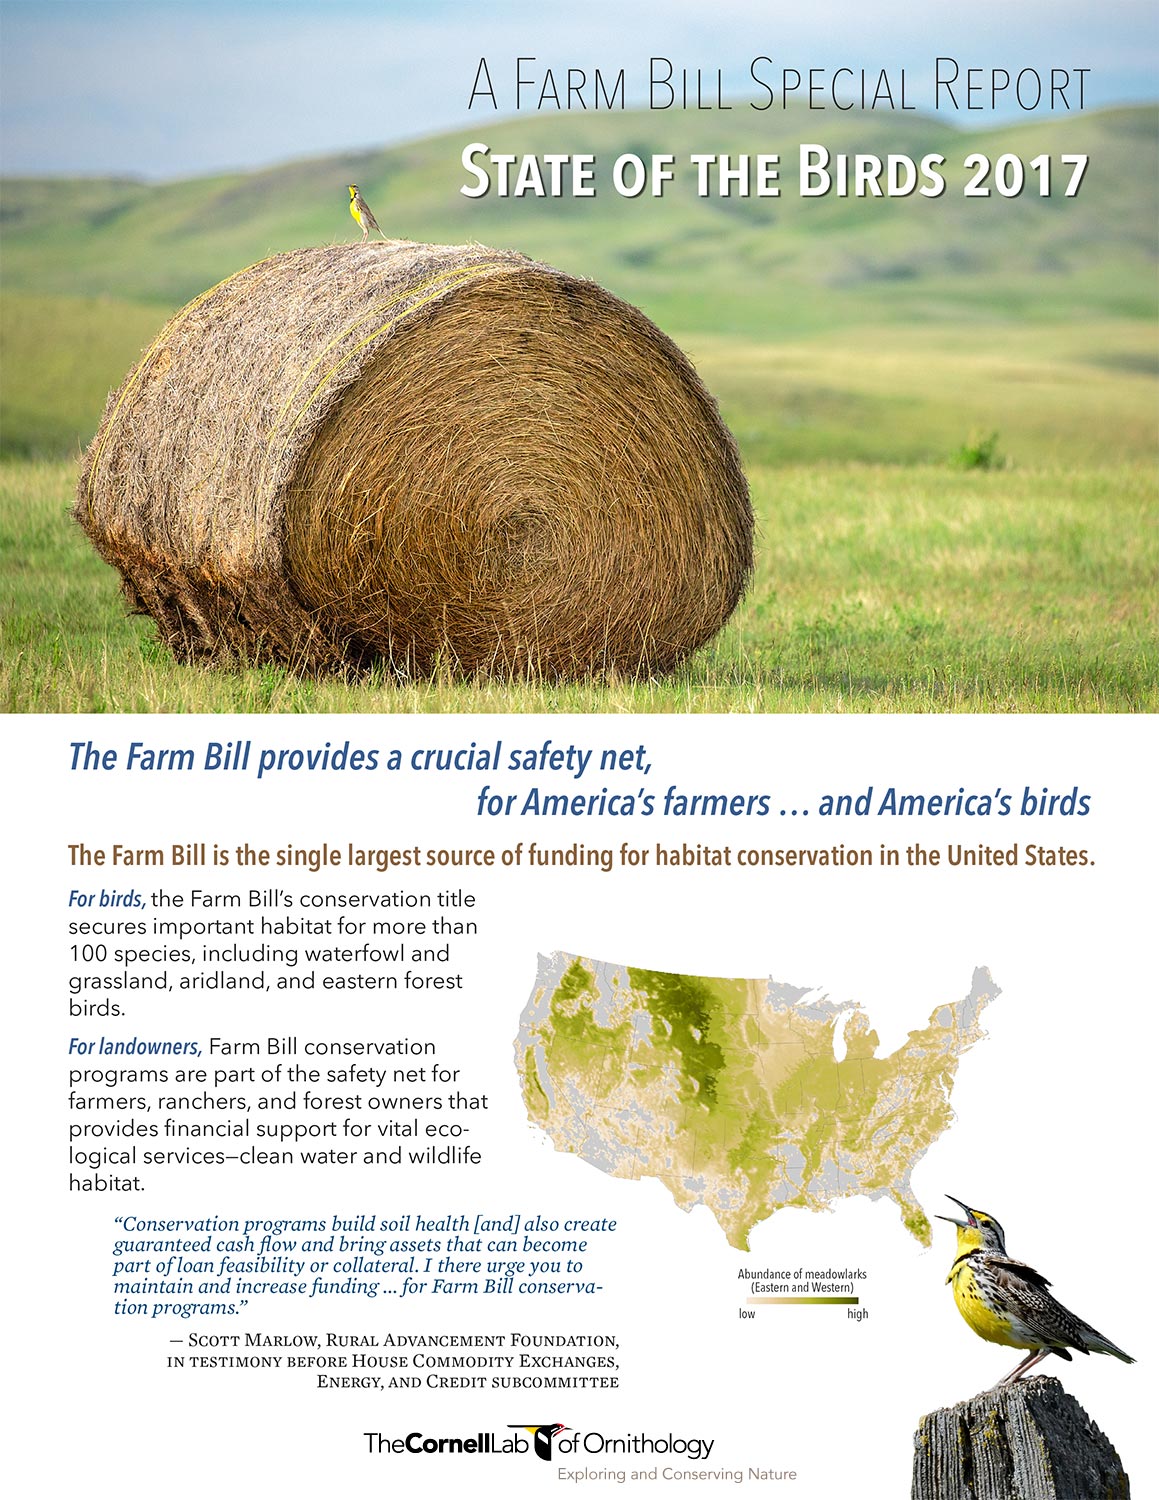 One of my rural photos appears on cover of State of the Birds 2017 report